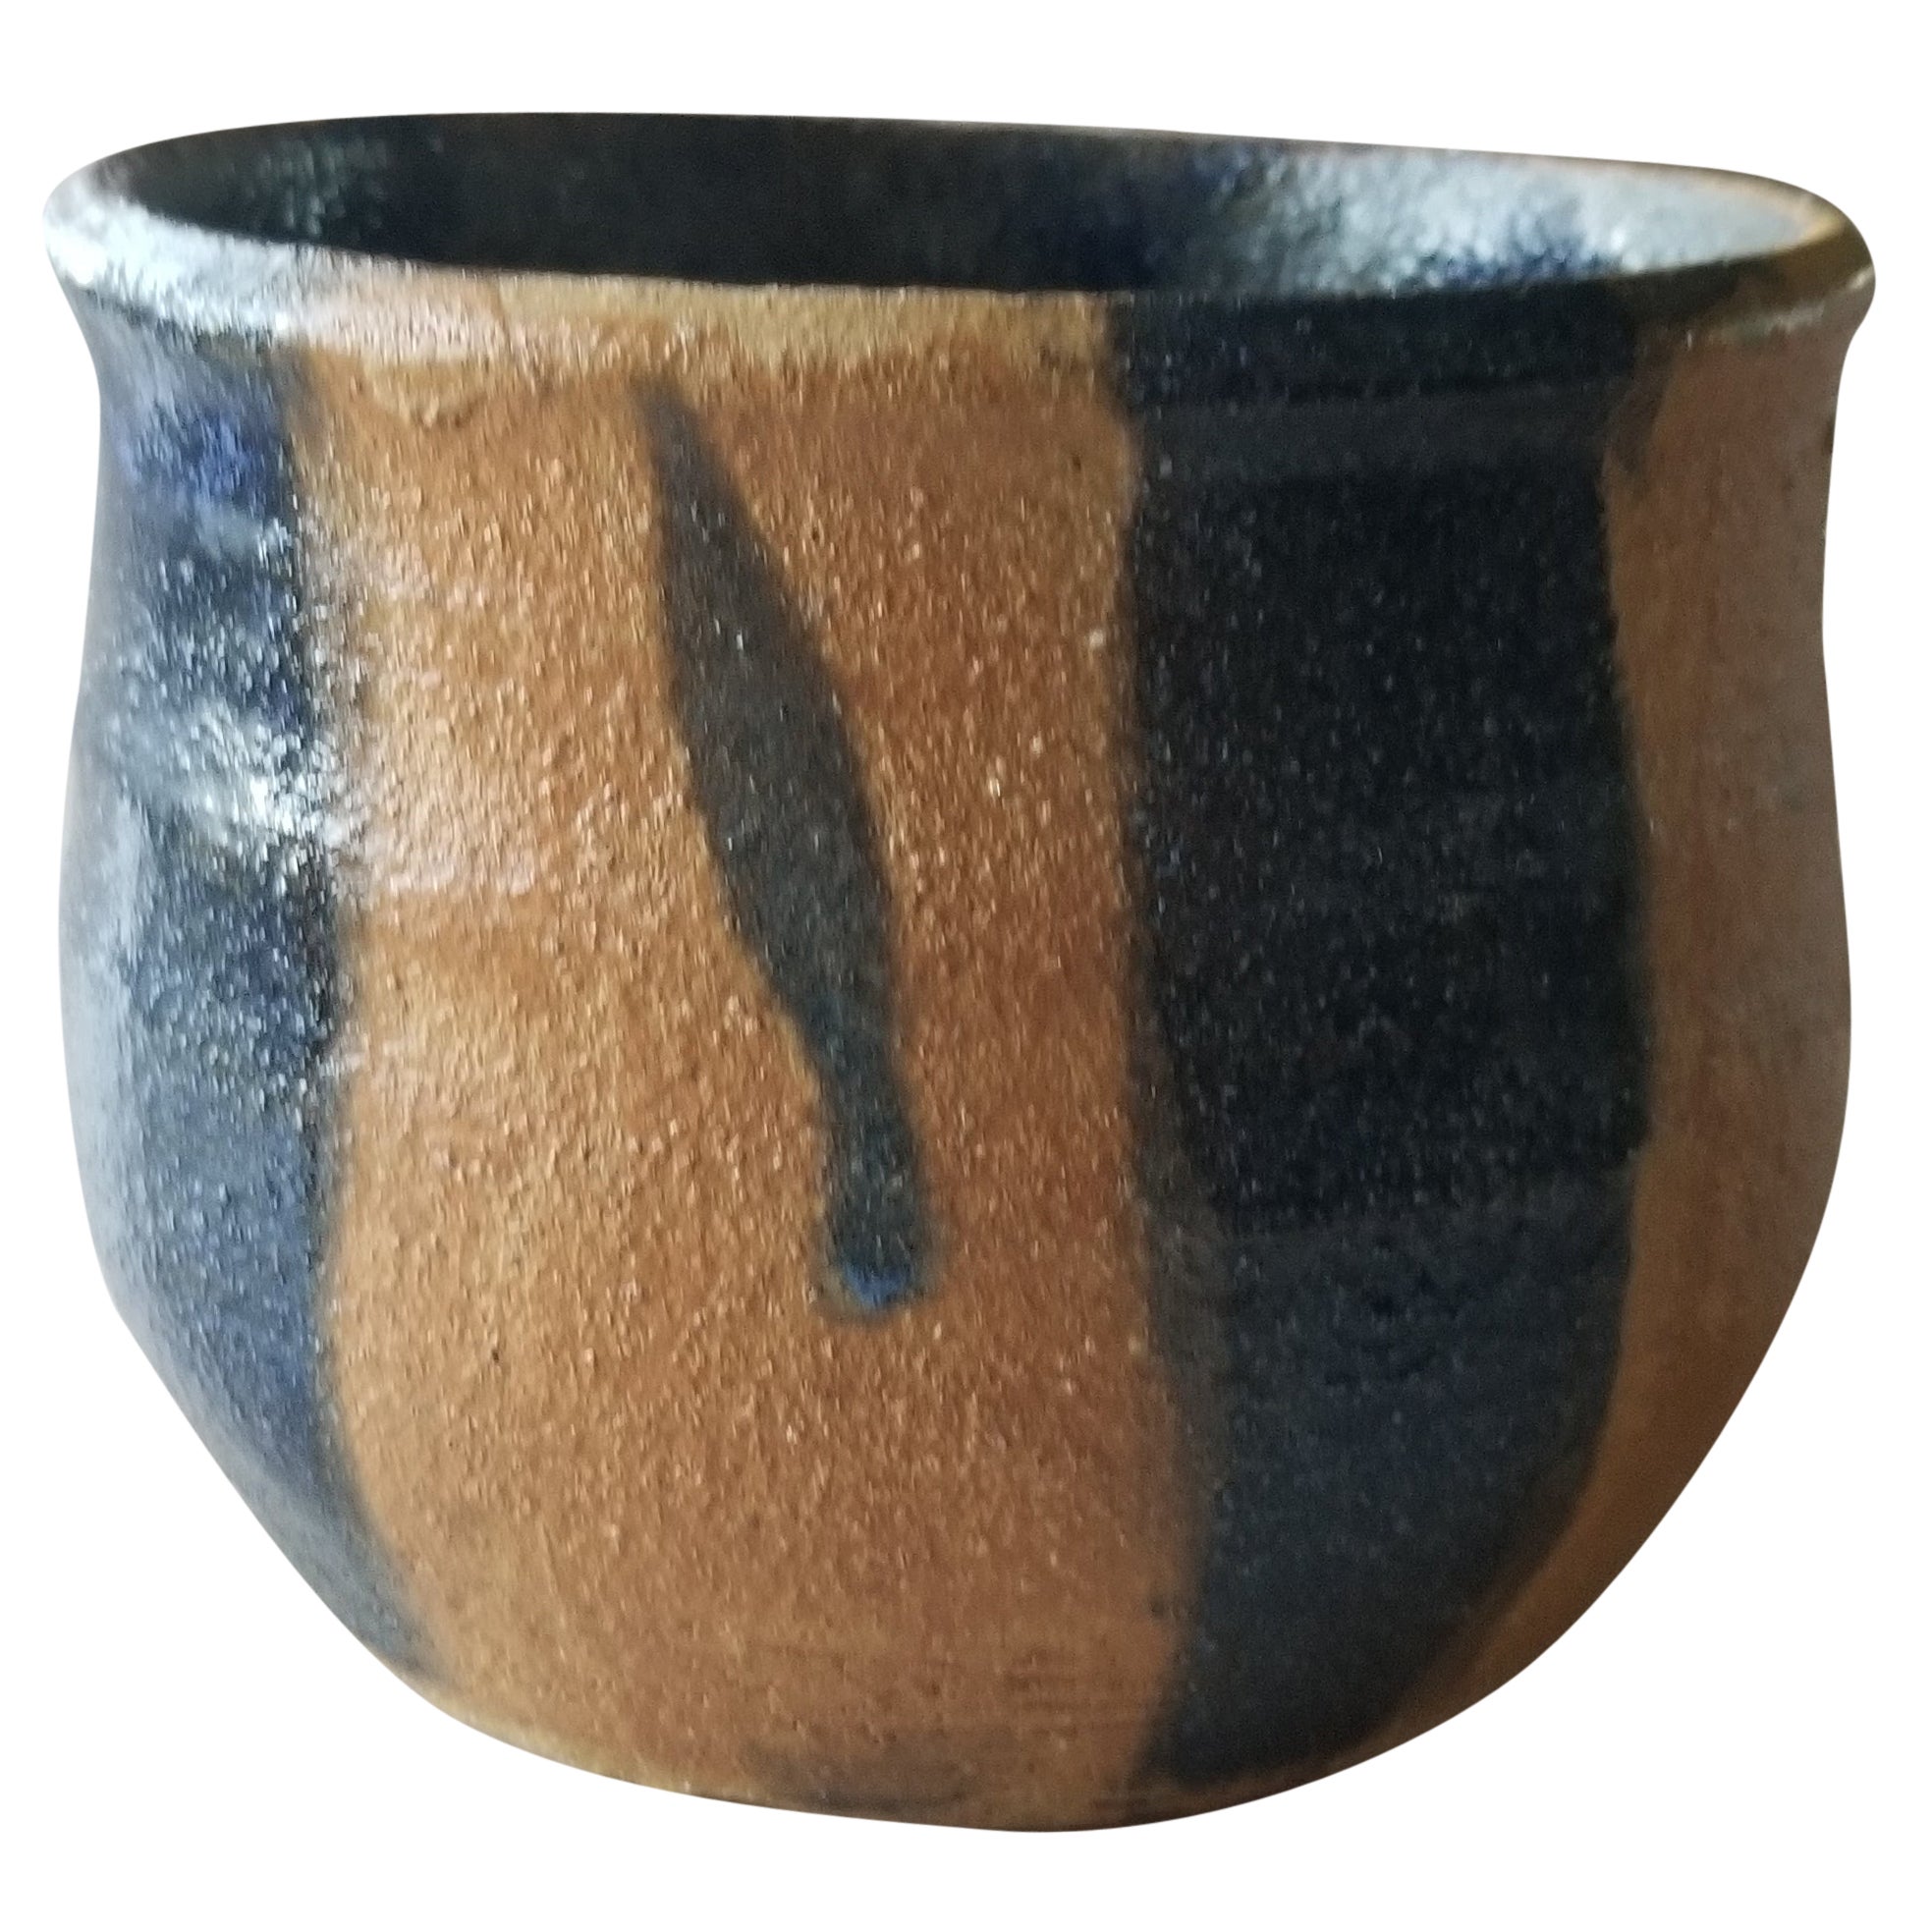 AMBIANIC offers
Calif modern ceramic art stone pottery terracotta & glazed navy blue signed by maker.
Luscious glazed blue interior. Blue swishes exterior.
Artist signed, Alicia 1982.
Measures: 4 inches tall x 4.5 inches diameter
Original preowned